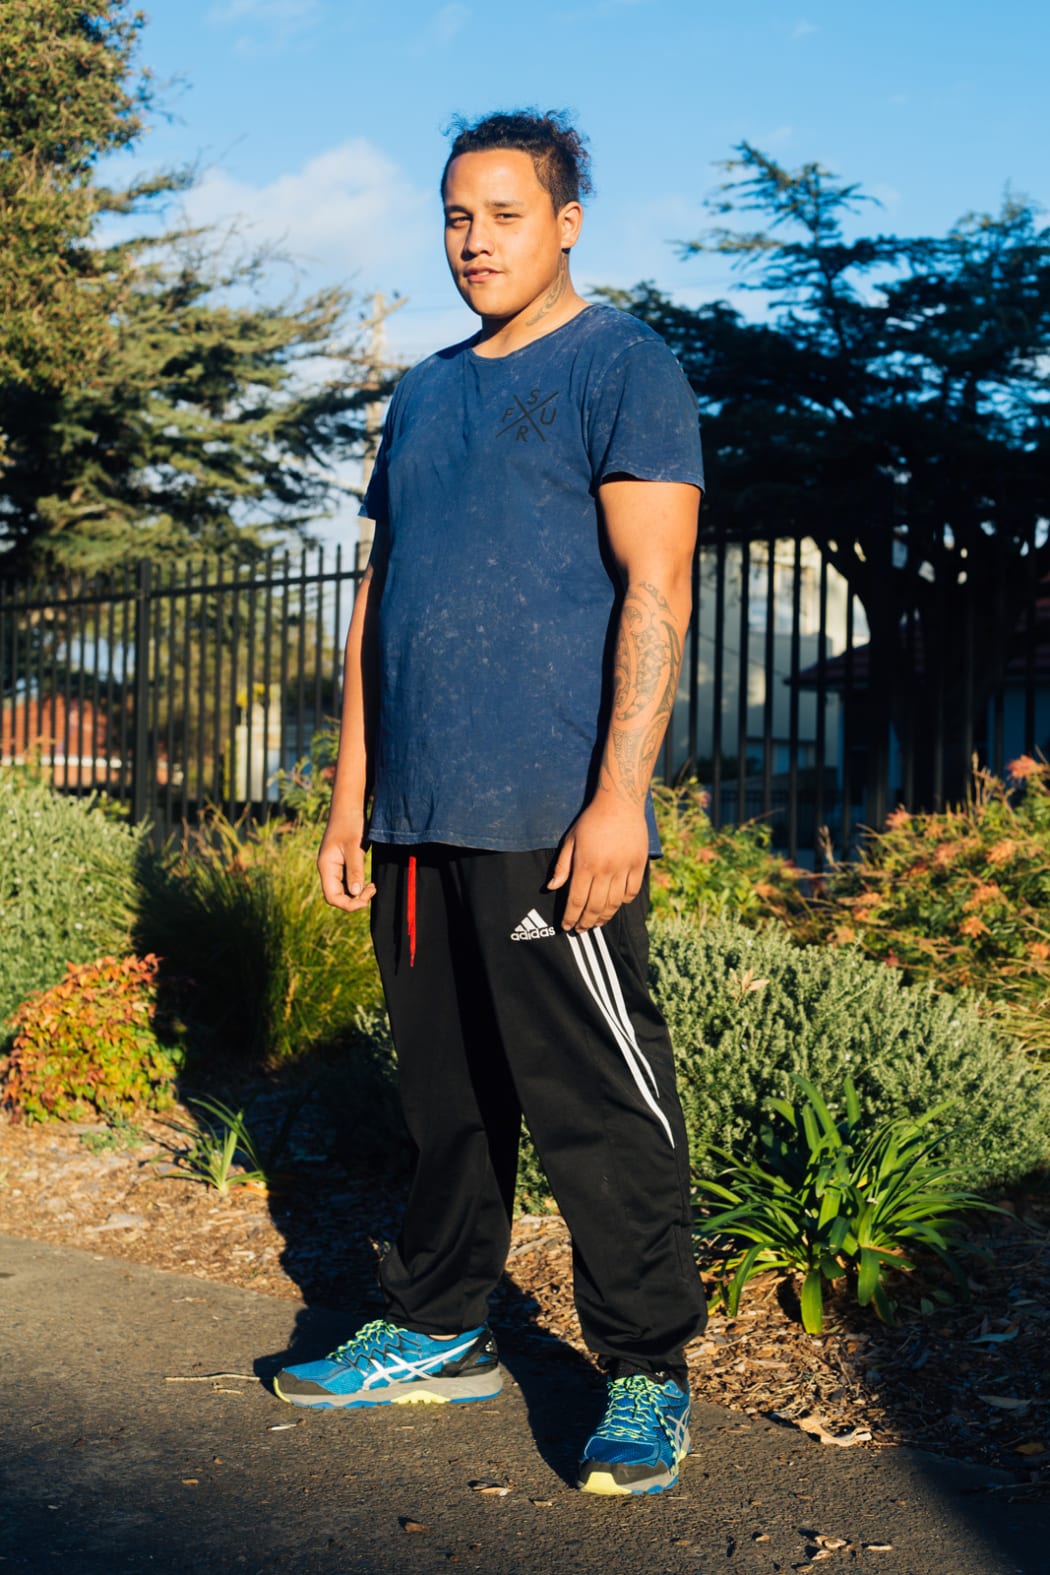 Rereata Pickering (Ngā Puhi) moved to Australia when he was three and is now attending Kapa Haka lessons in hope of making the Australian regionals next year.